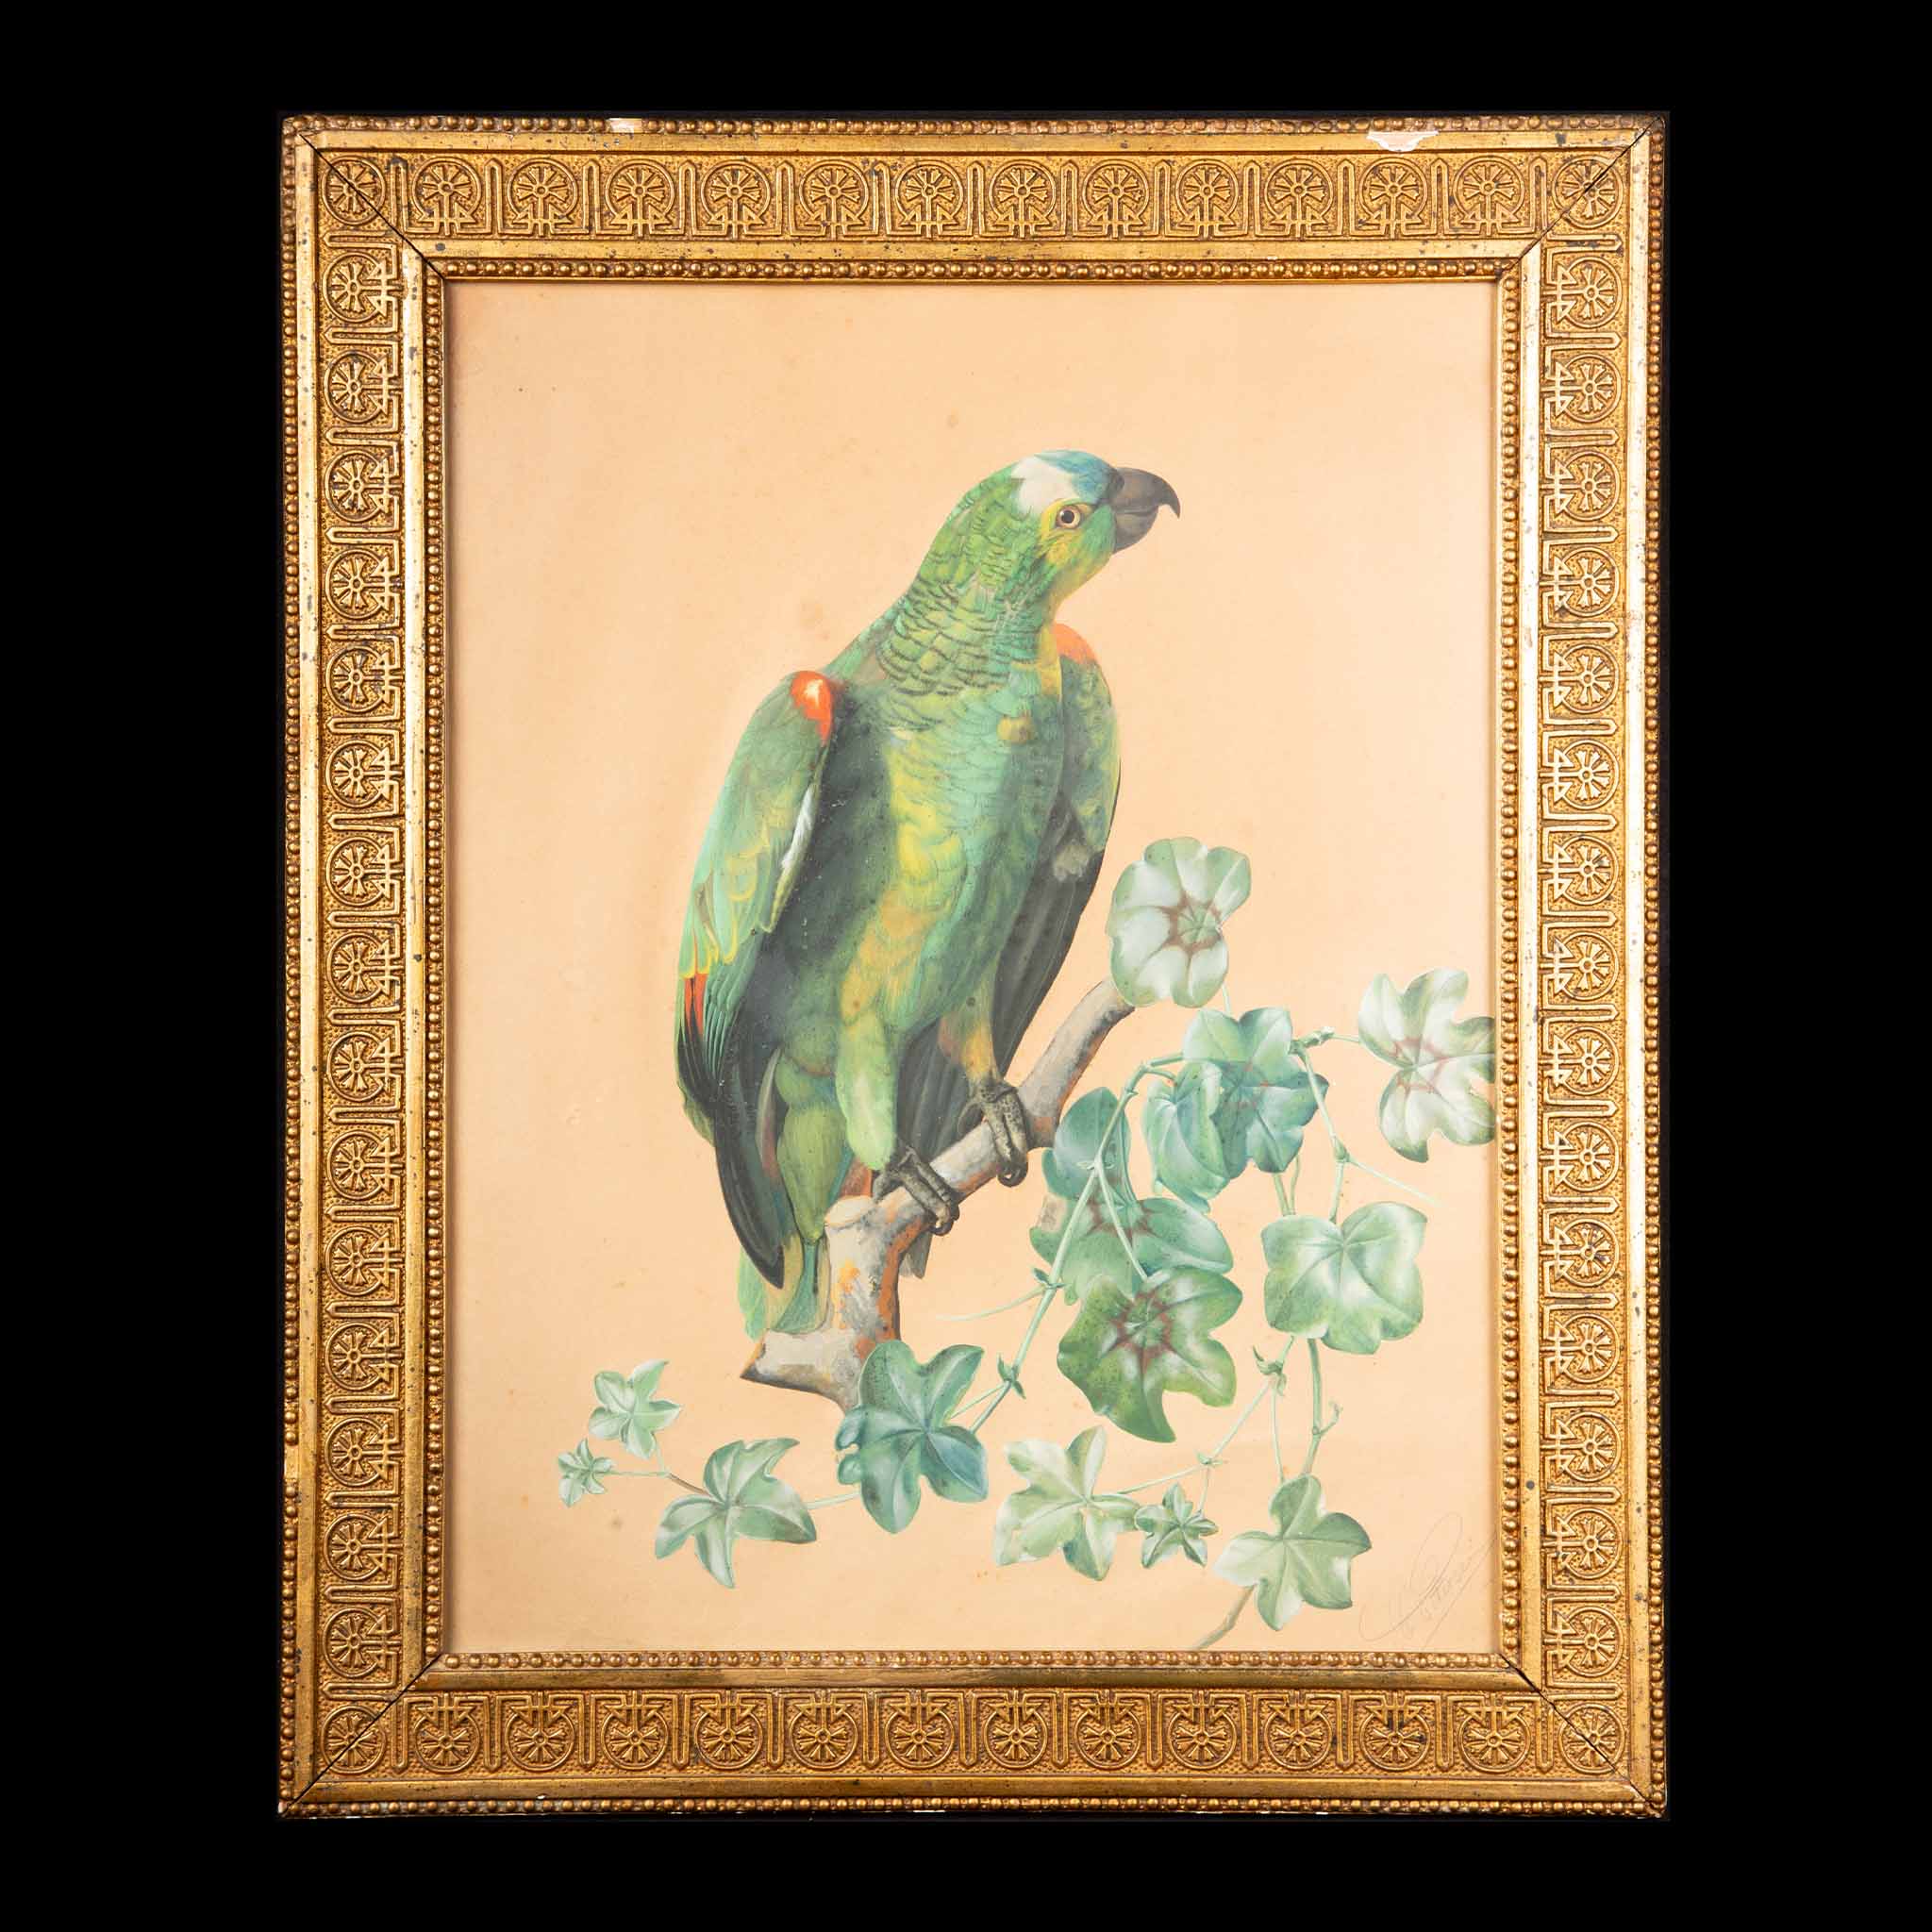 19th Century Vibrant Avian Charm: Parrot on a Branch by C. Petersen